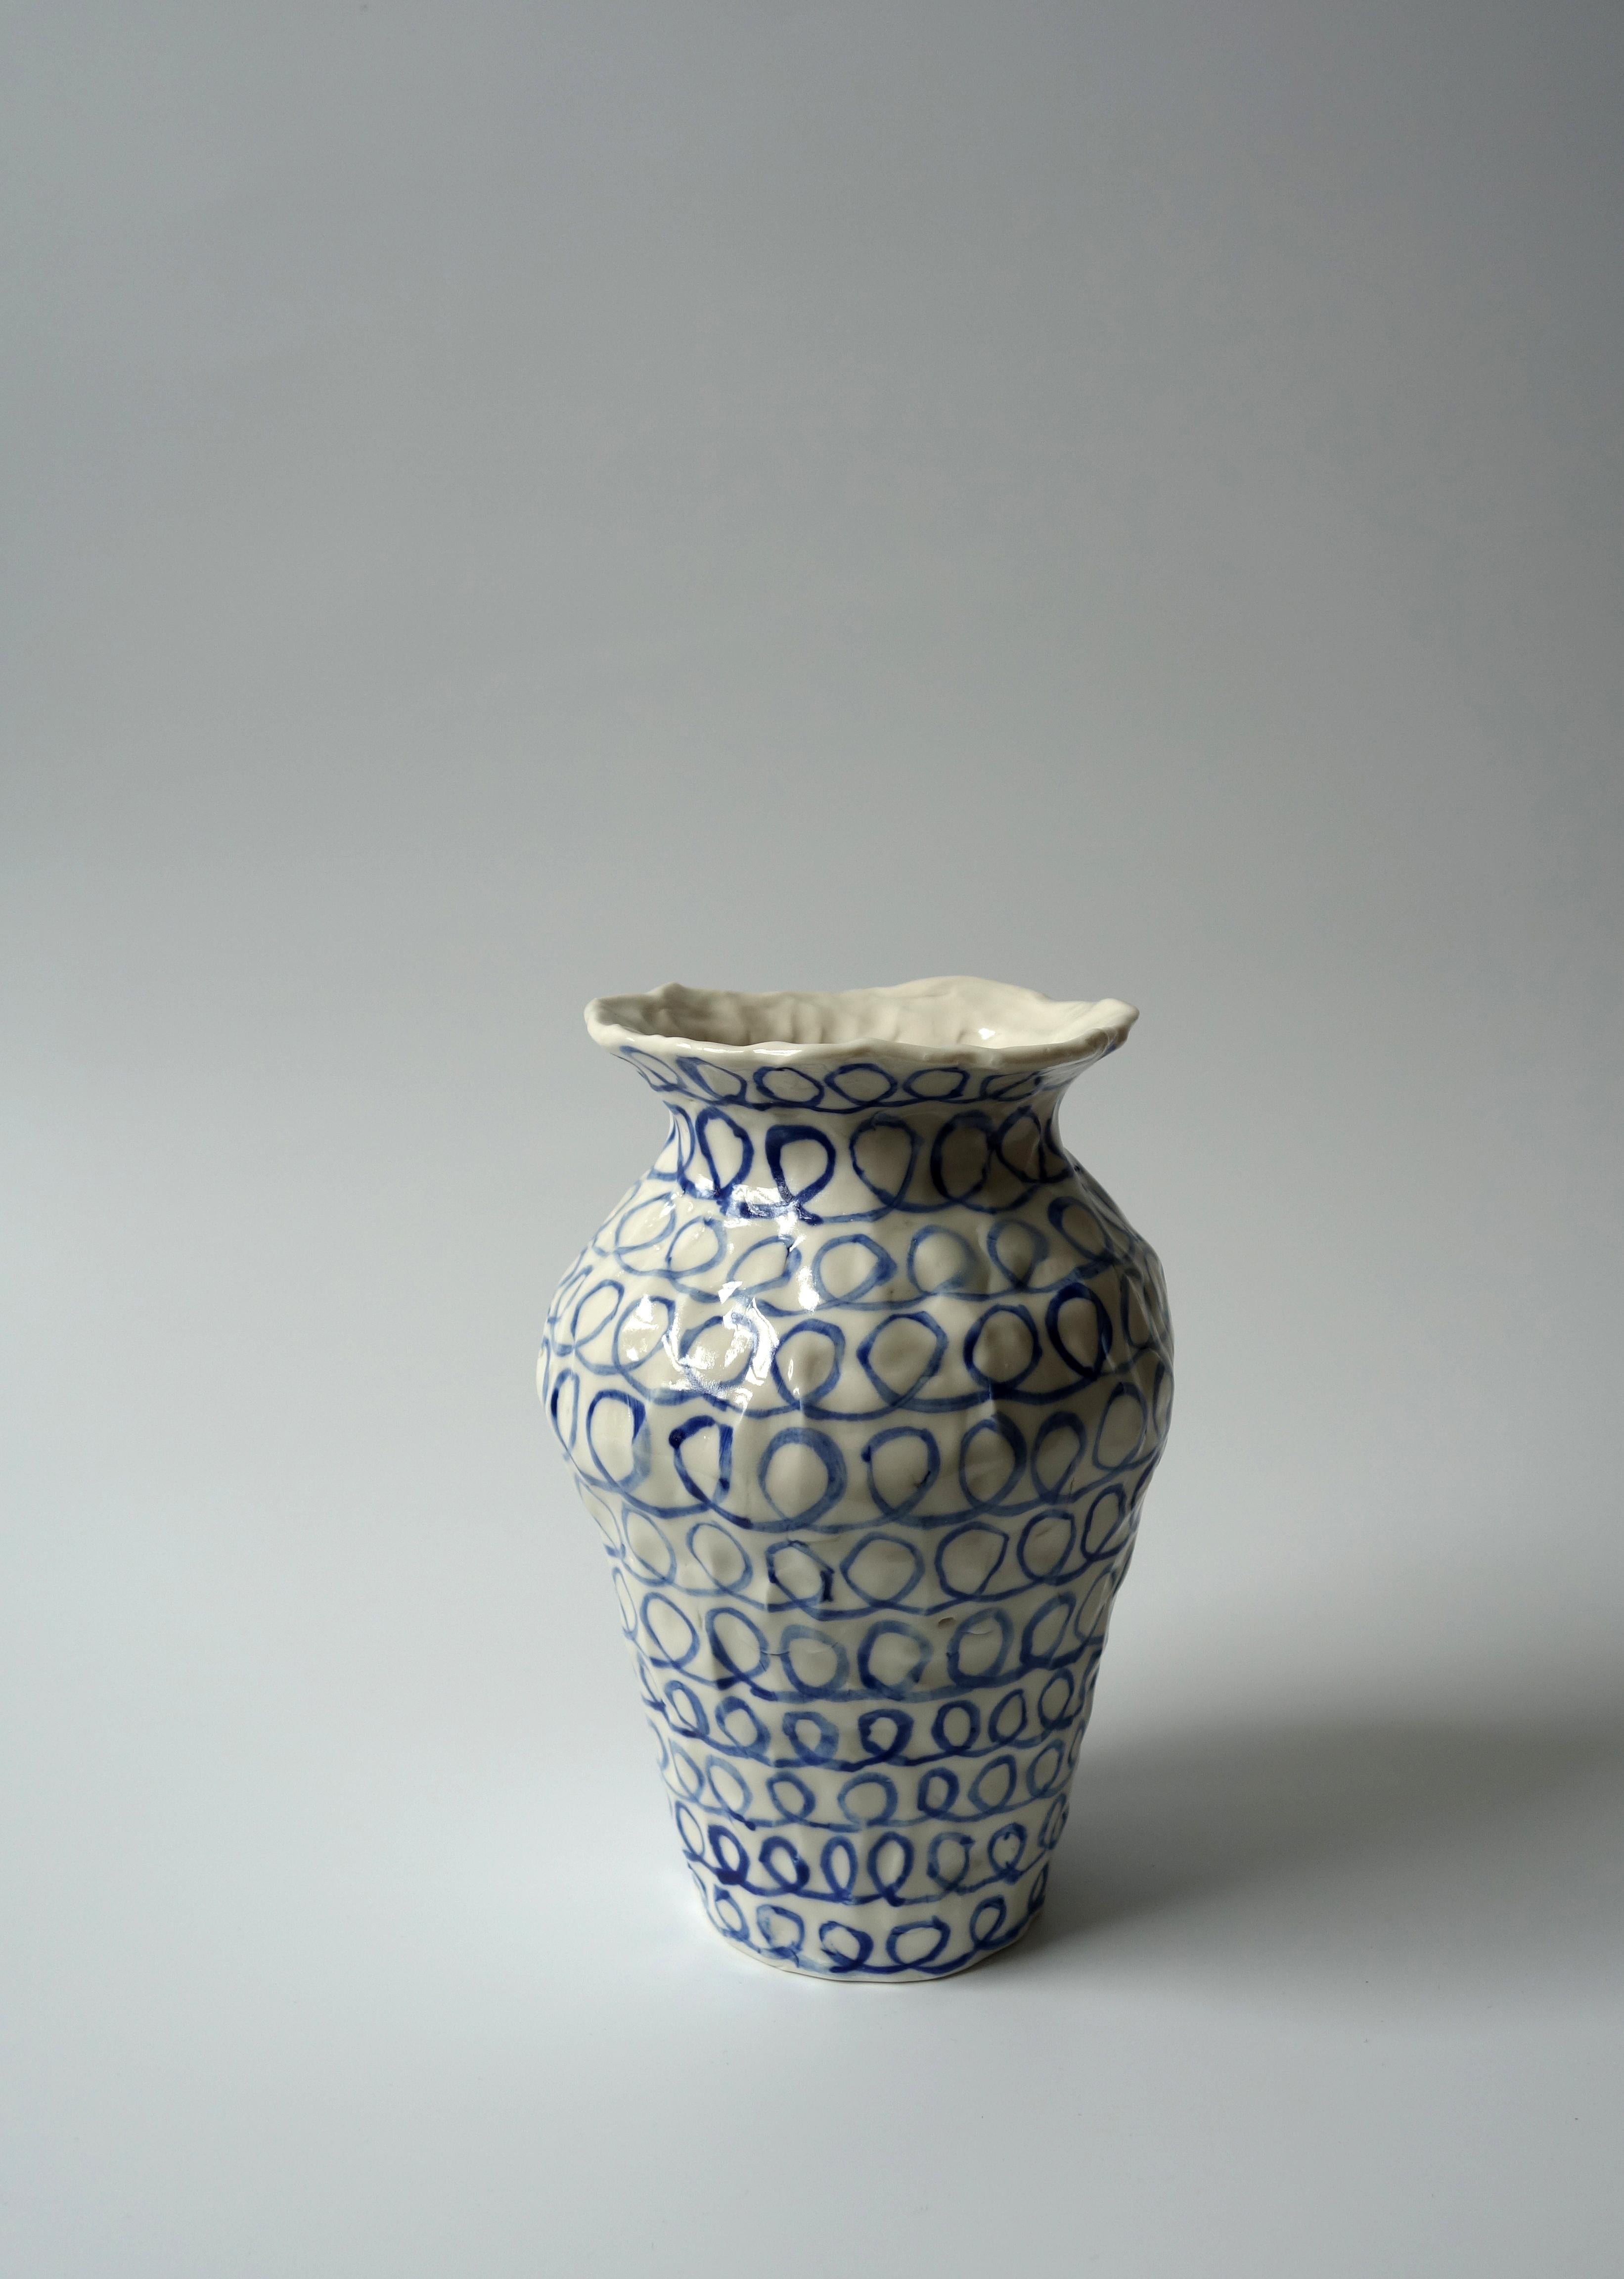 Porcelain Vase with Checkers by Caroline Harrius For Sale